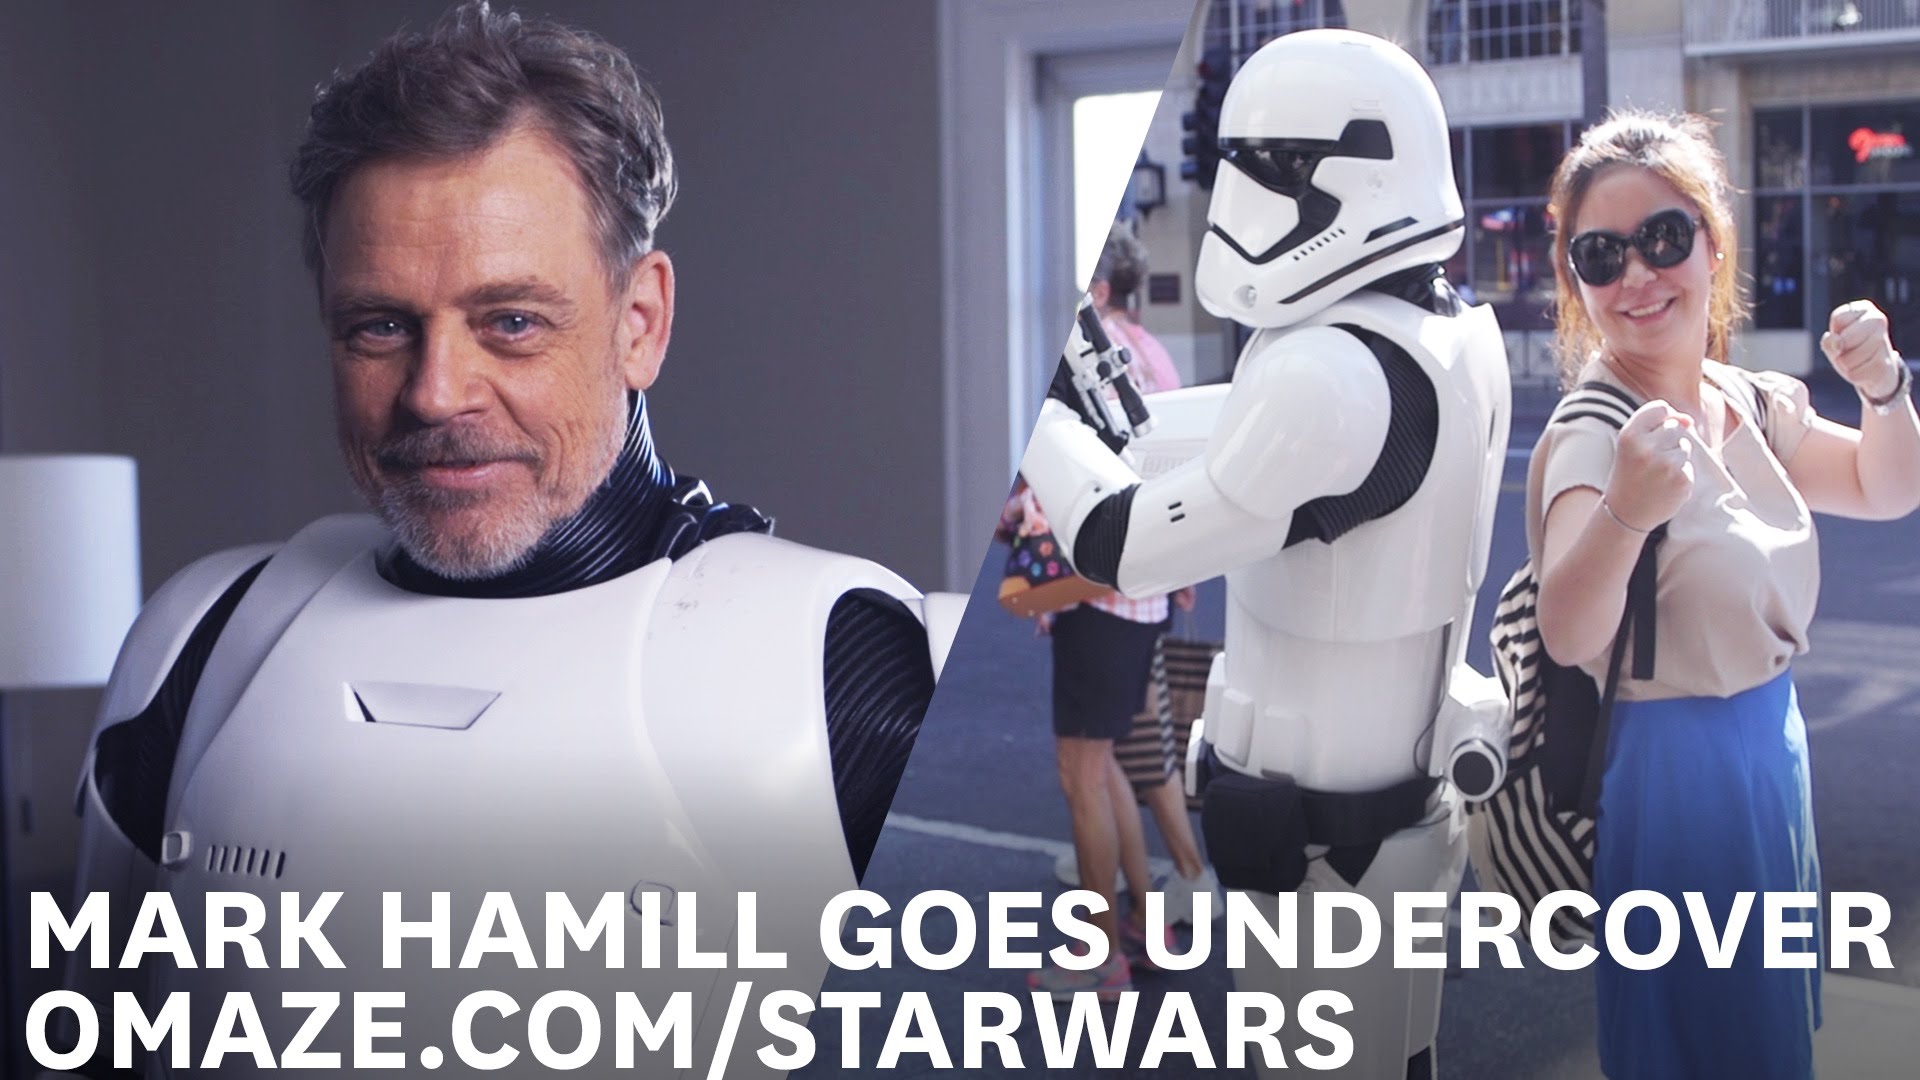 Mark Hamill Goes Undercover as a Stormtrooper on Hollywood Blvd ...